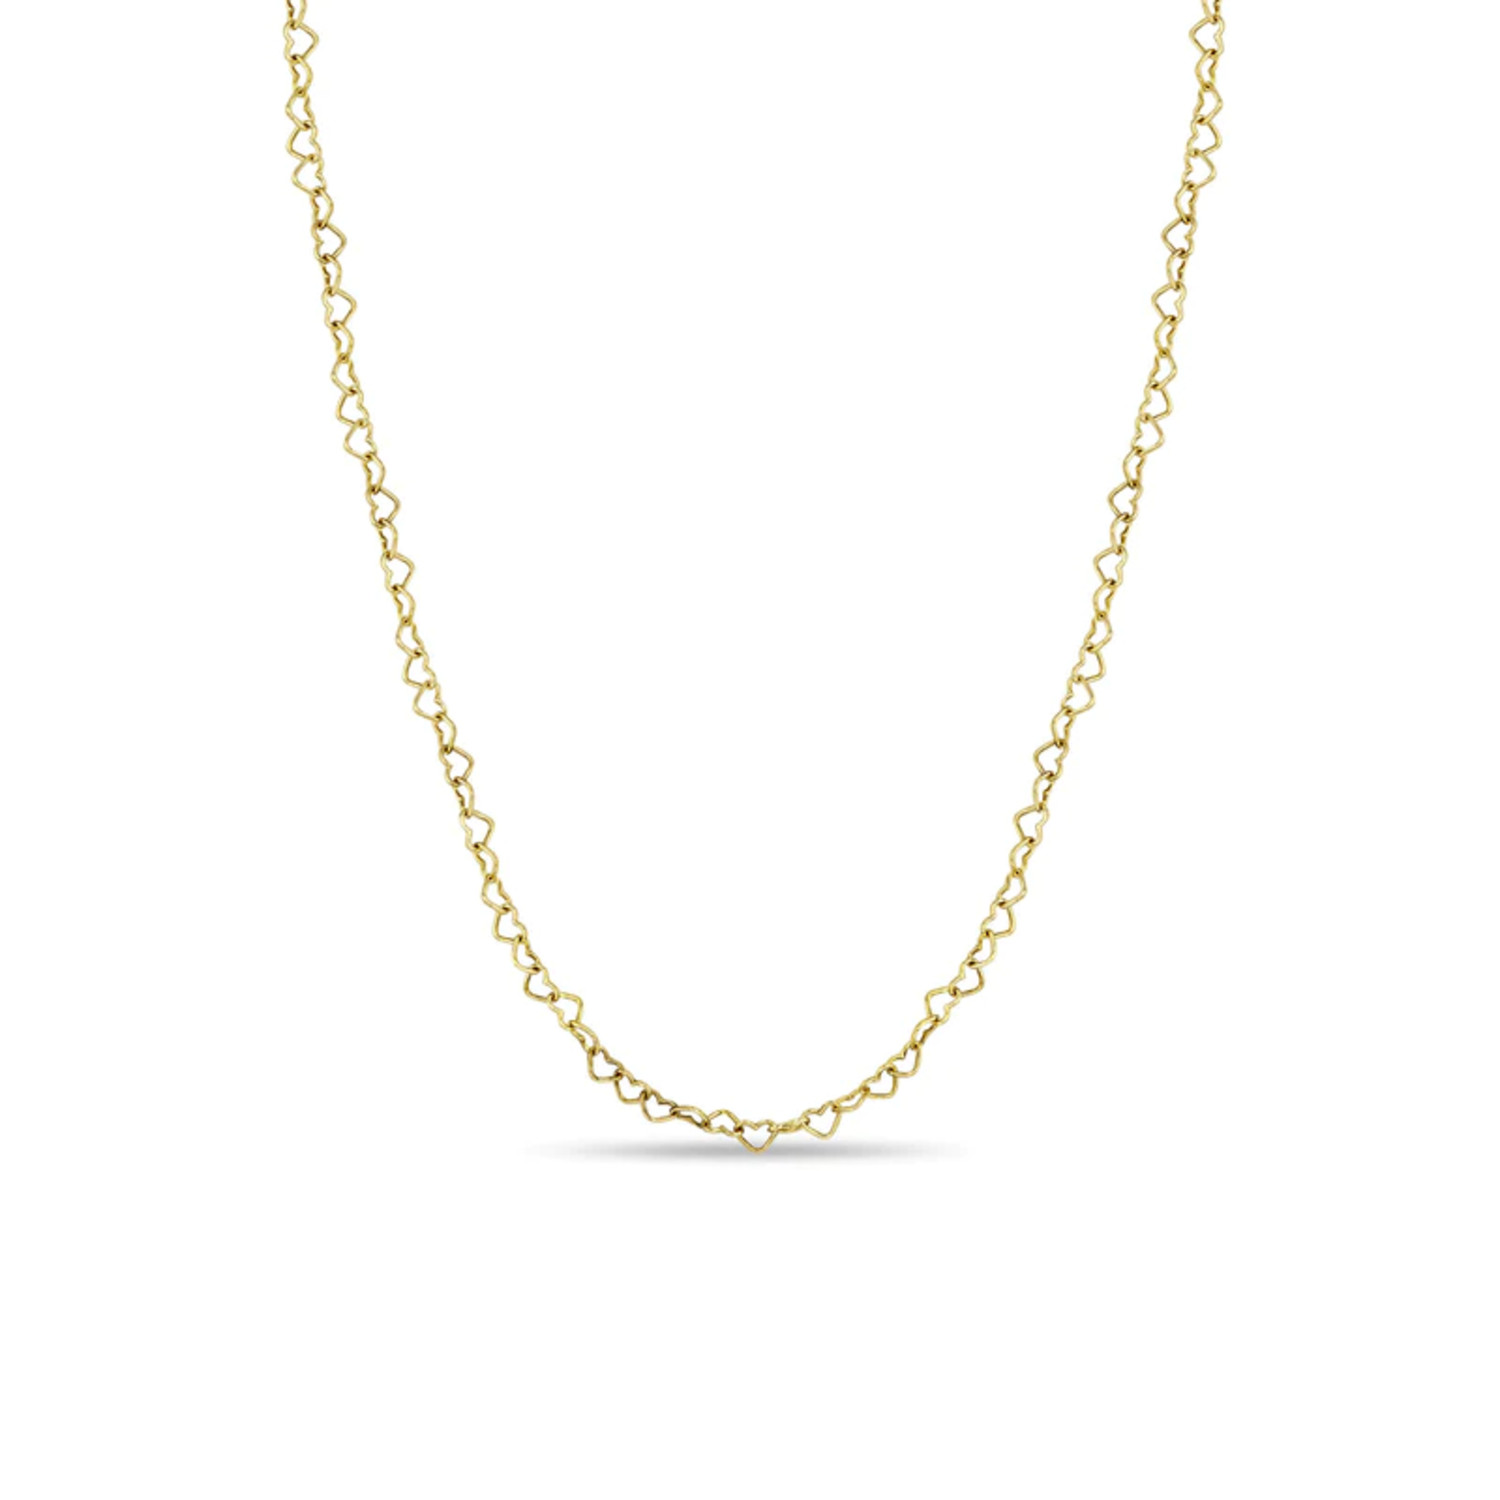 Open Heart Link Chain in 14K Yellow Gold